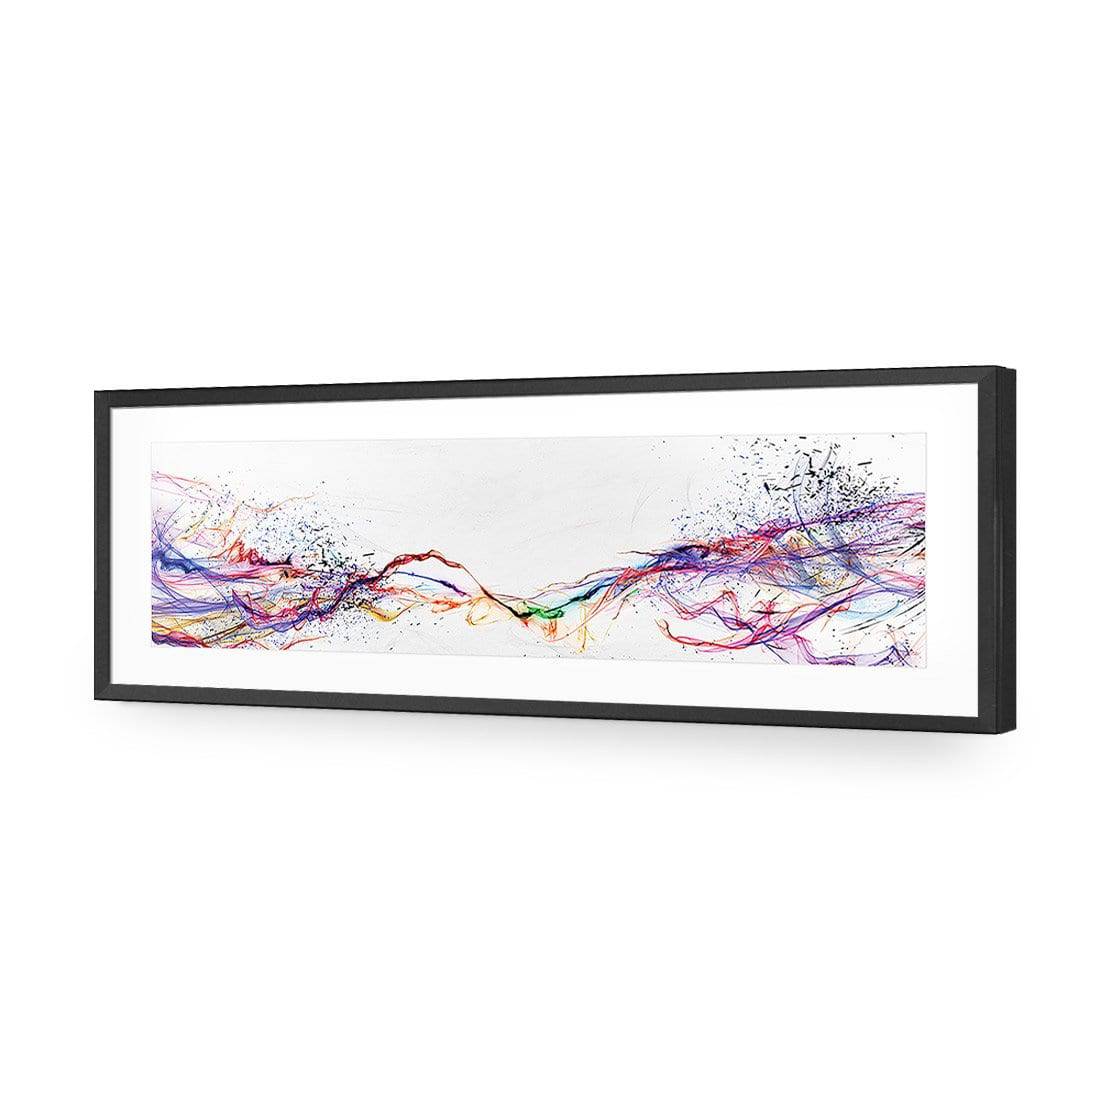 Electricity On Black, Inverted, Long-Acrylic-Wall Art Design-With Border-Acrylic - Black Frame-60x20cm-Wall Art Designs